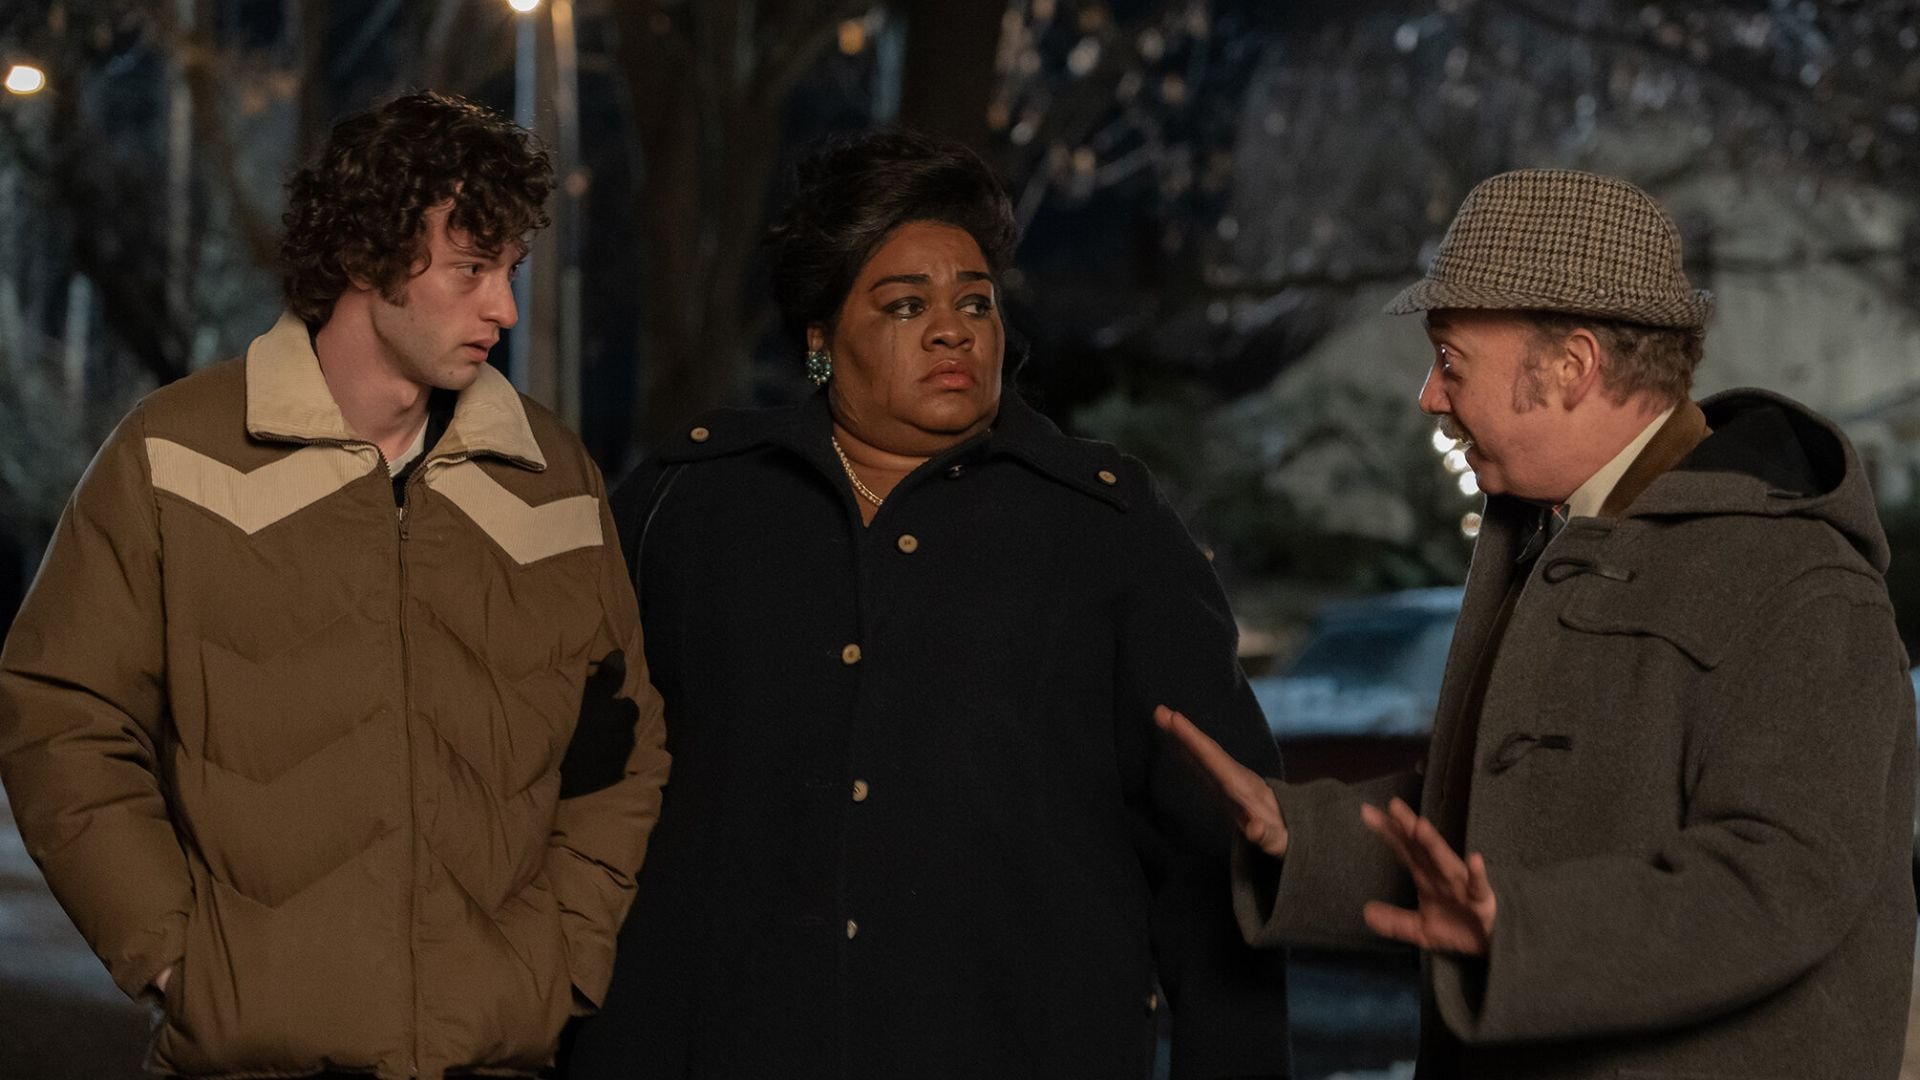 Paul Giamatti as Paul Hunham talking to Dominic Sessa as Angus Tully and Da'Vine Joy Randolph as Mary Lamb outside a party in 'The Holdovers,' 7 Great Oscar Nominated Scripts You Should Read